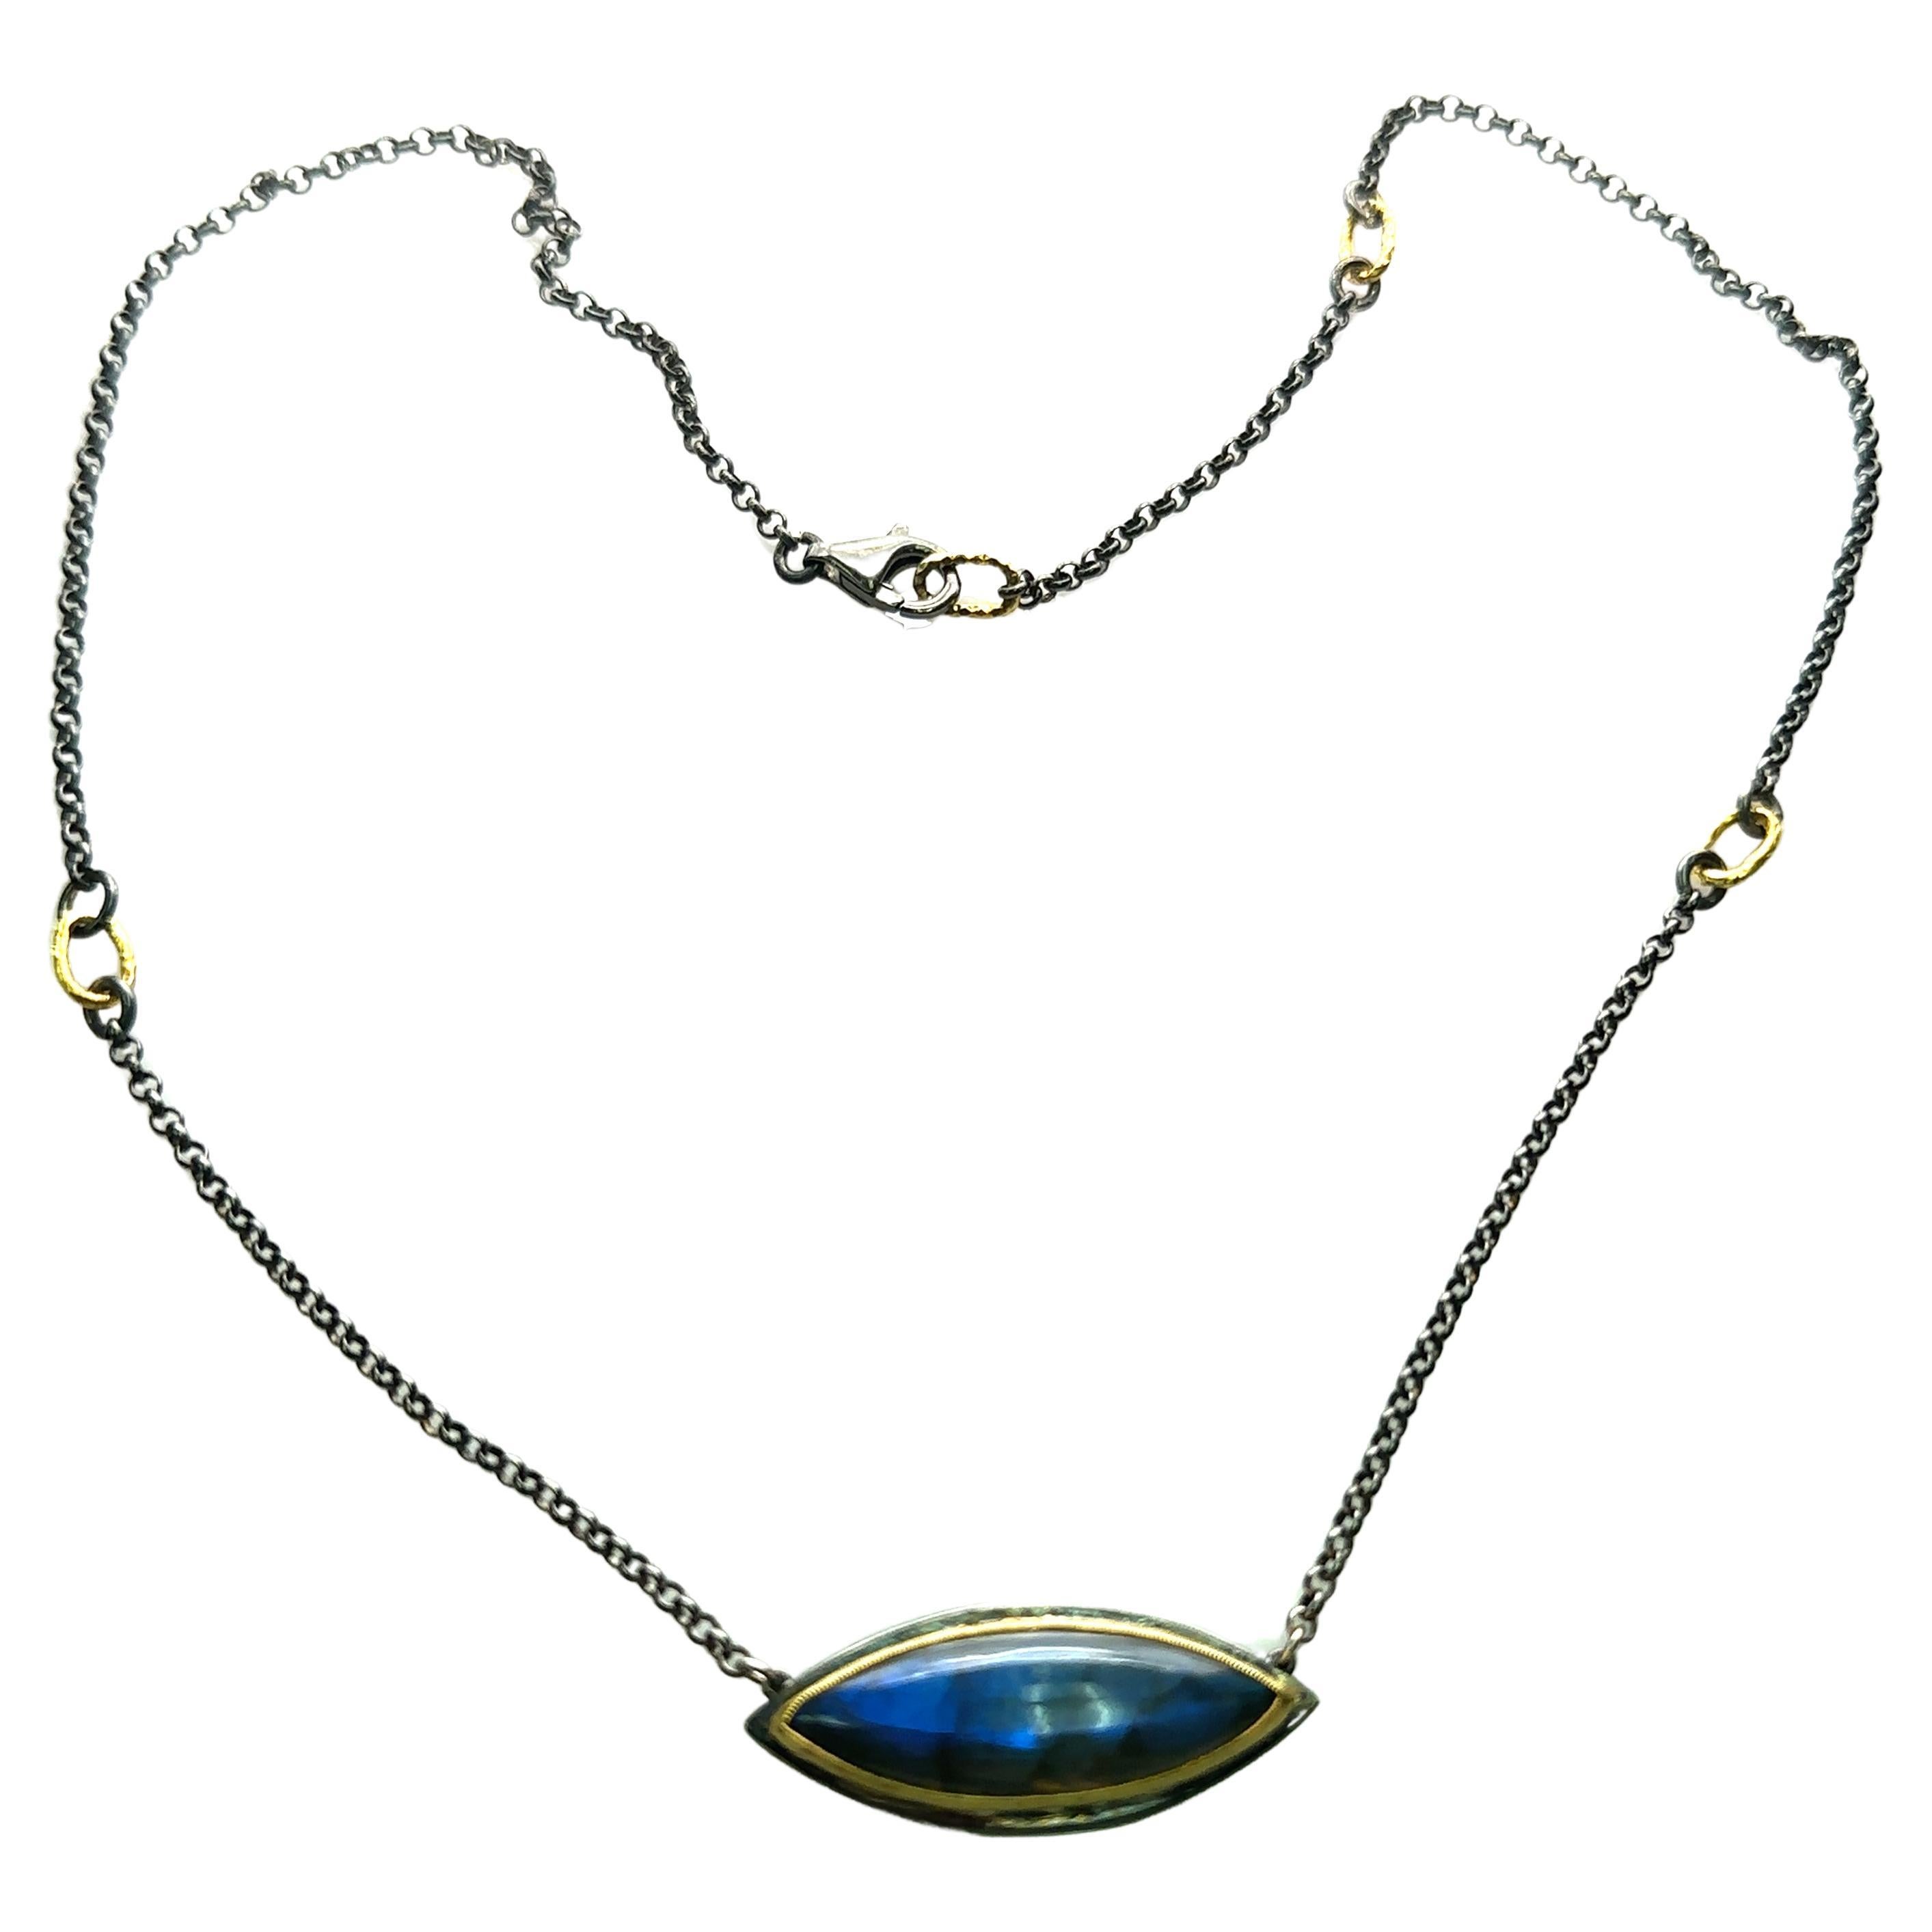 JAS-19-1839 - 24KT GOLD/SS 18" NECKLACE with LABRADORITE 